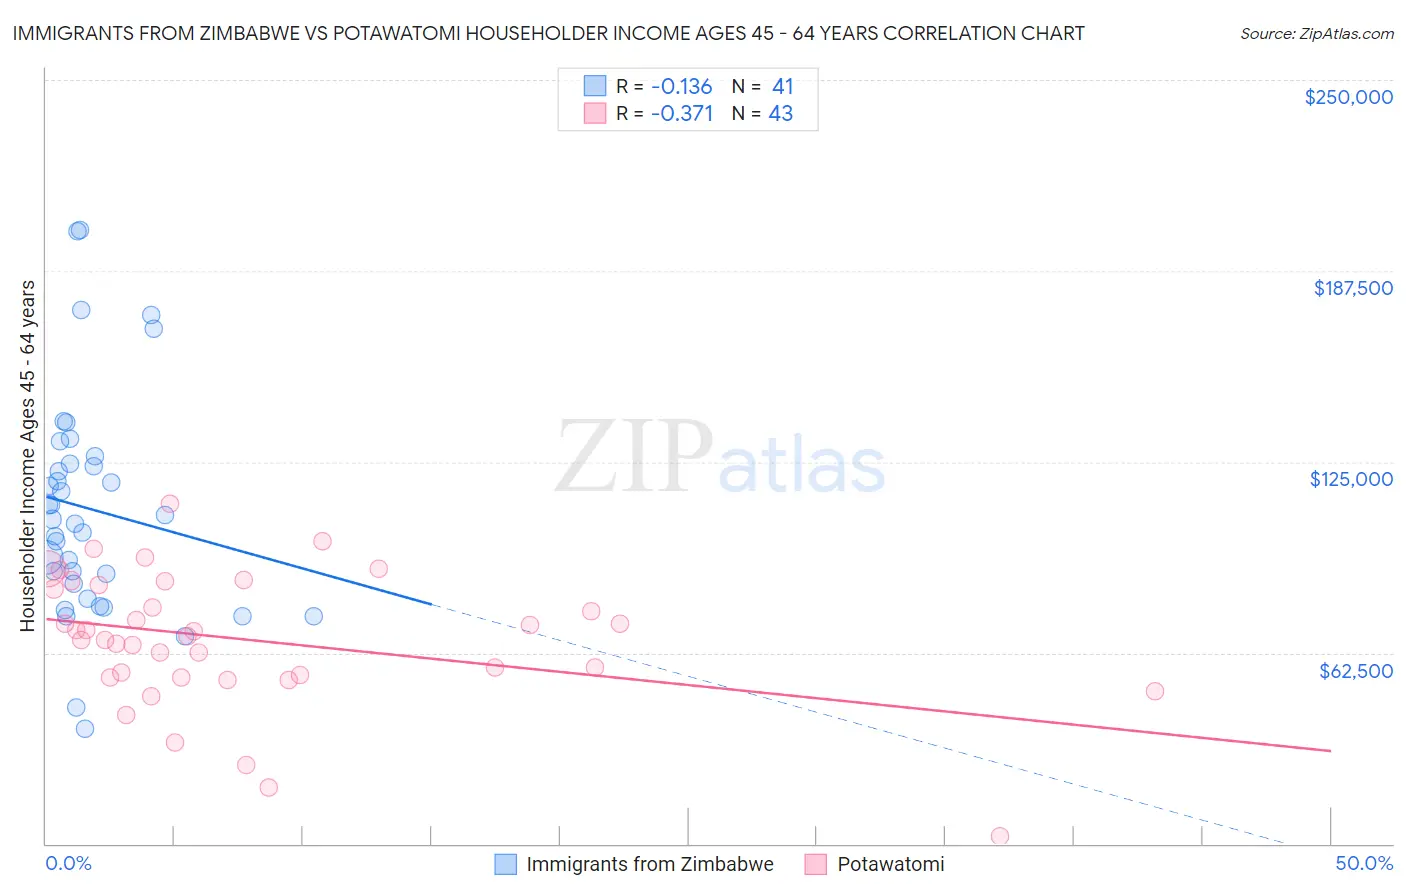 Immigrants from Zimbabwe vs Potawatomi Householder Income Ages 45 - 64 years